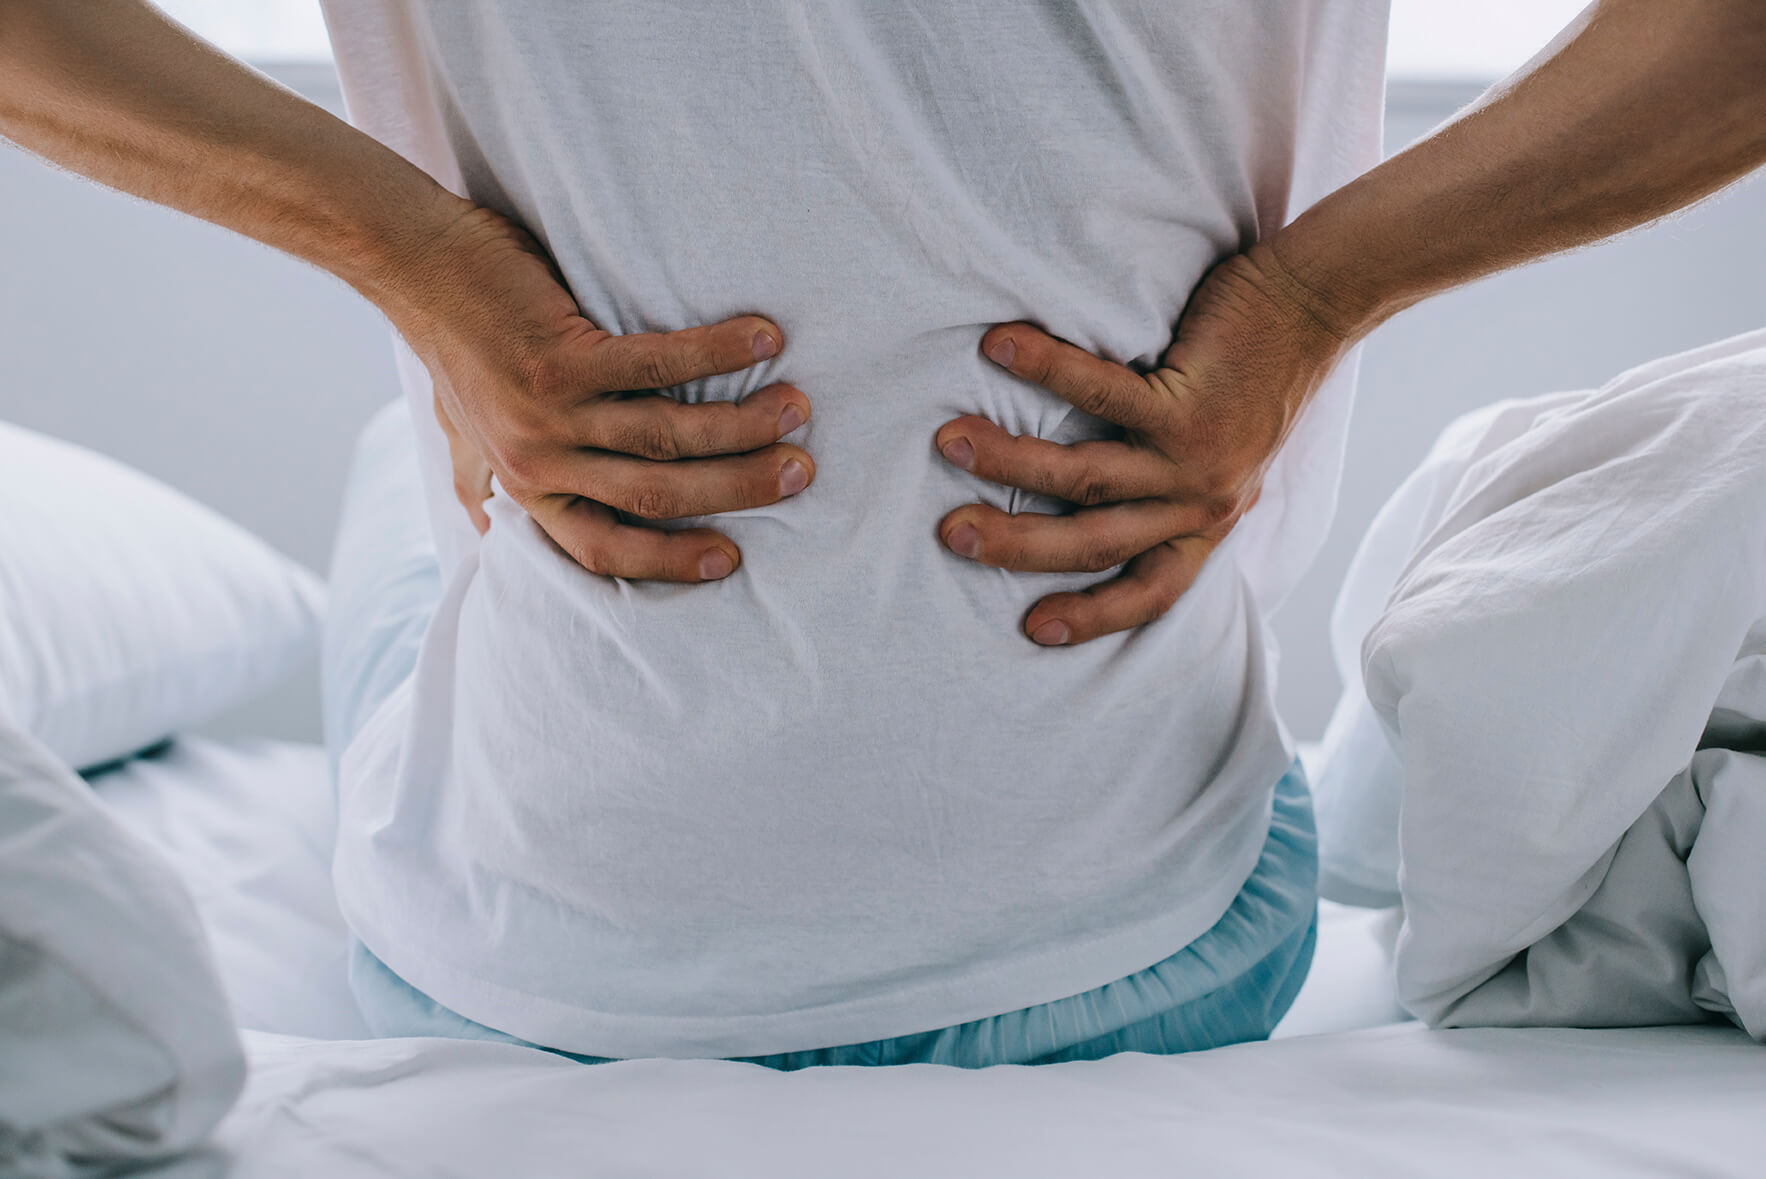 How To Treat Back Pain With Home Remedies?